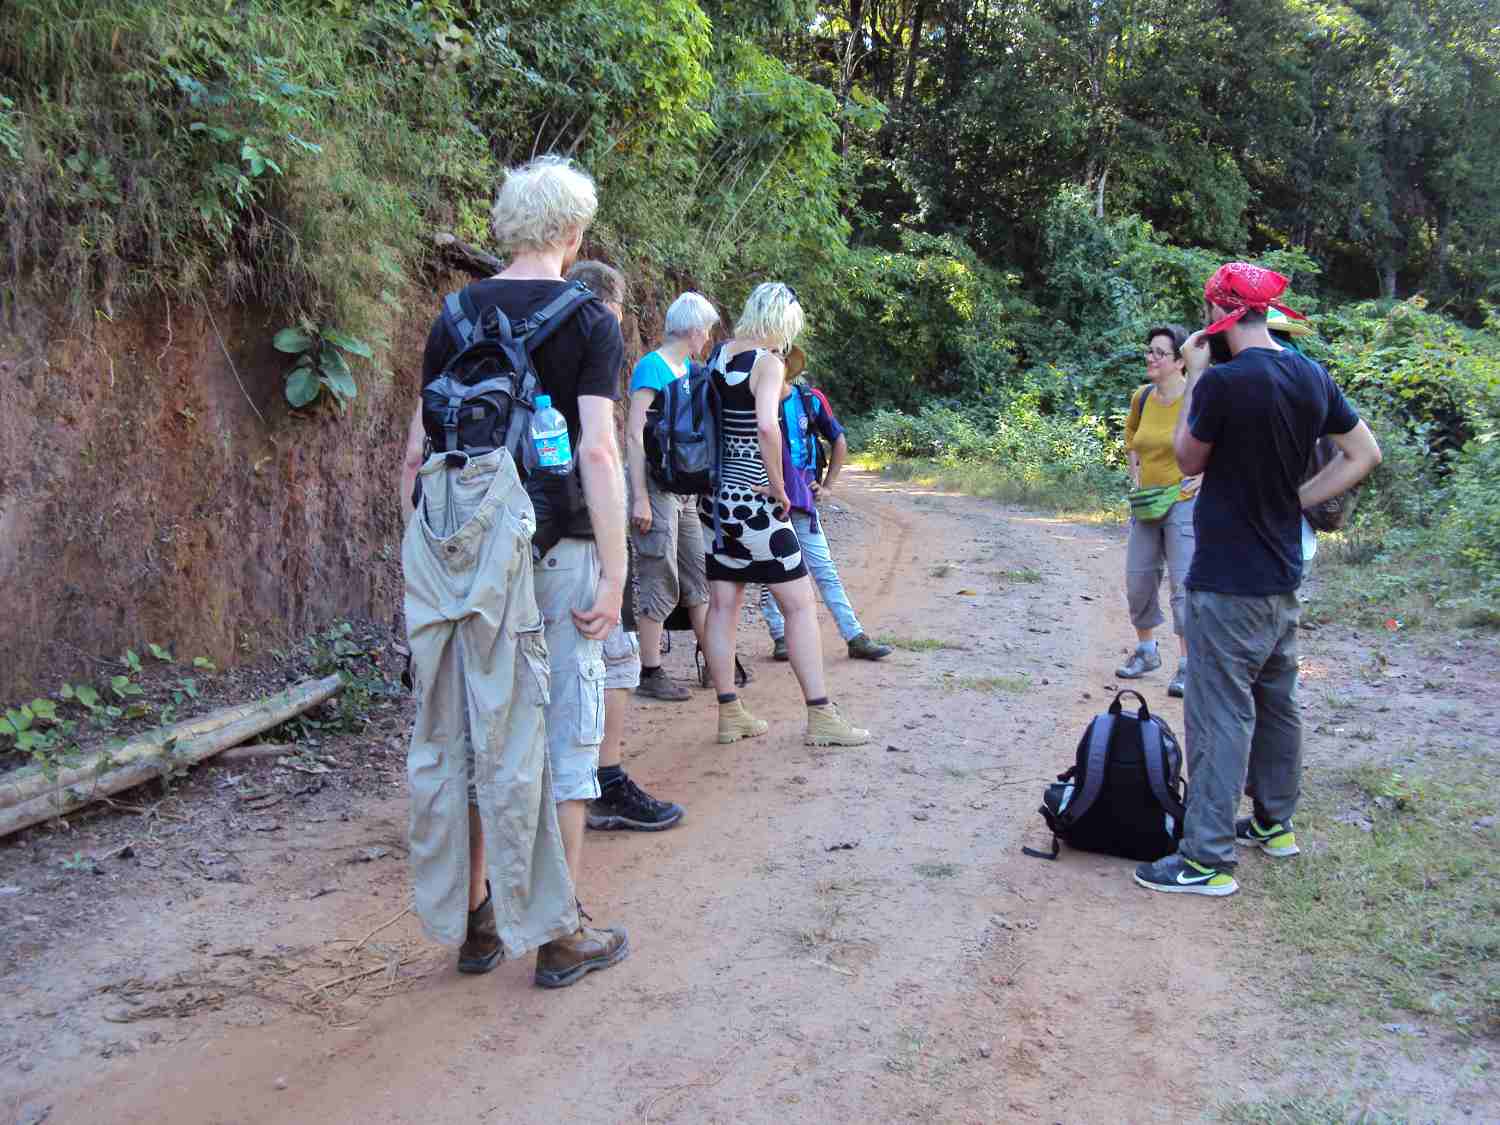 Our Group on the Trek